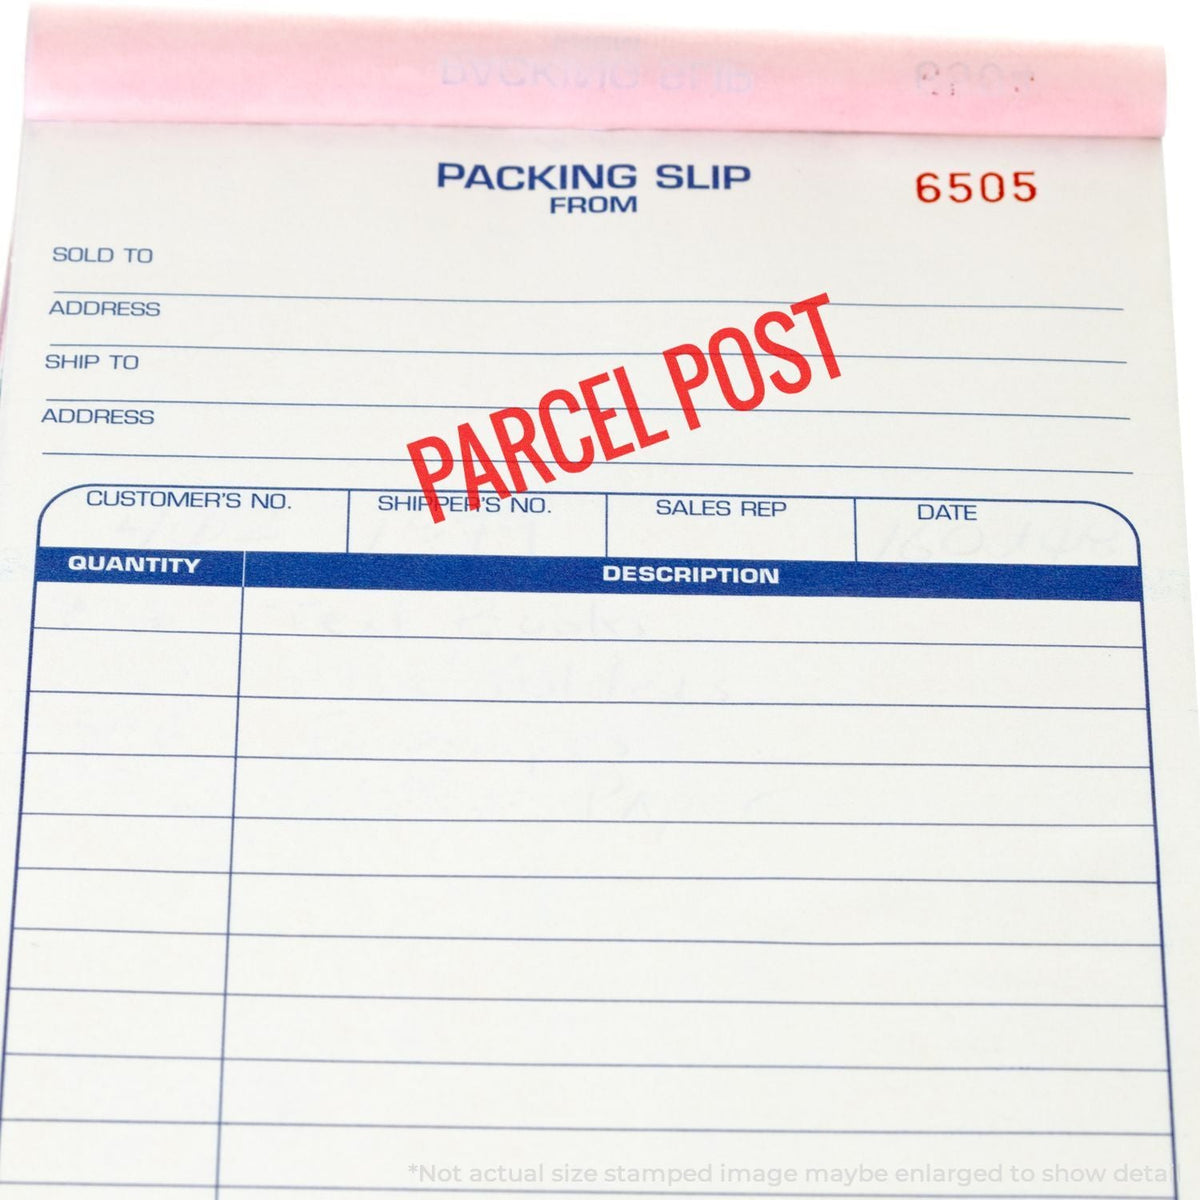 Self-Inking Parcel Post Stamp Lifestyle Photo